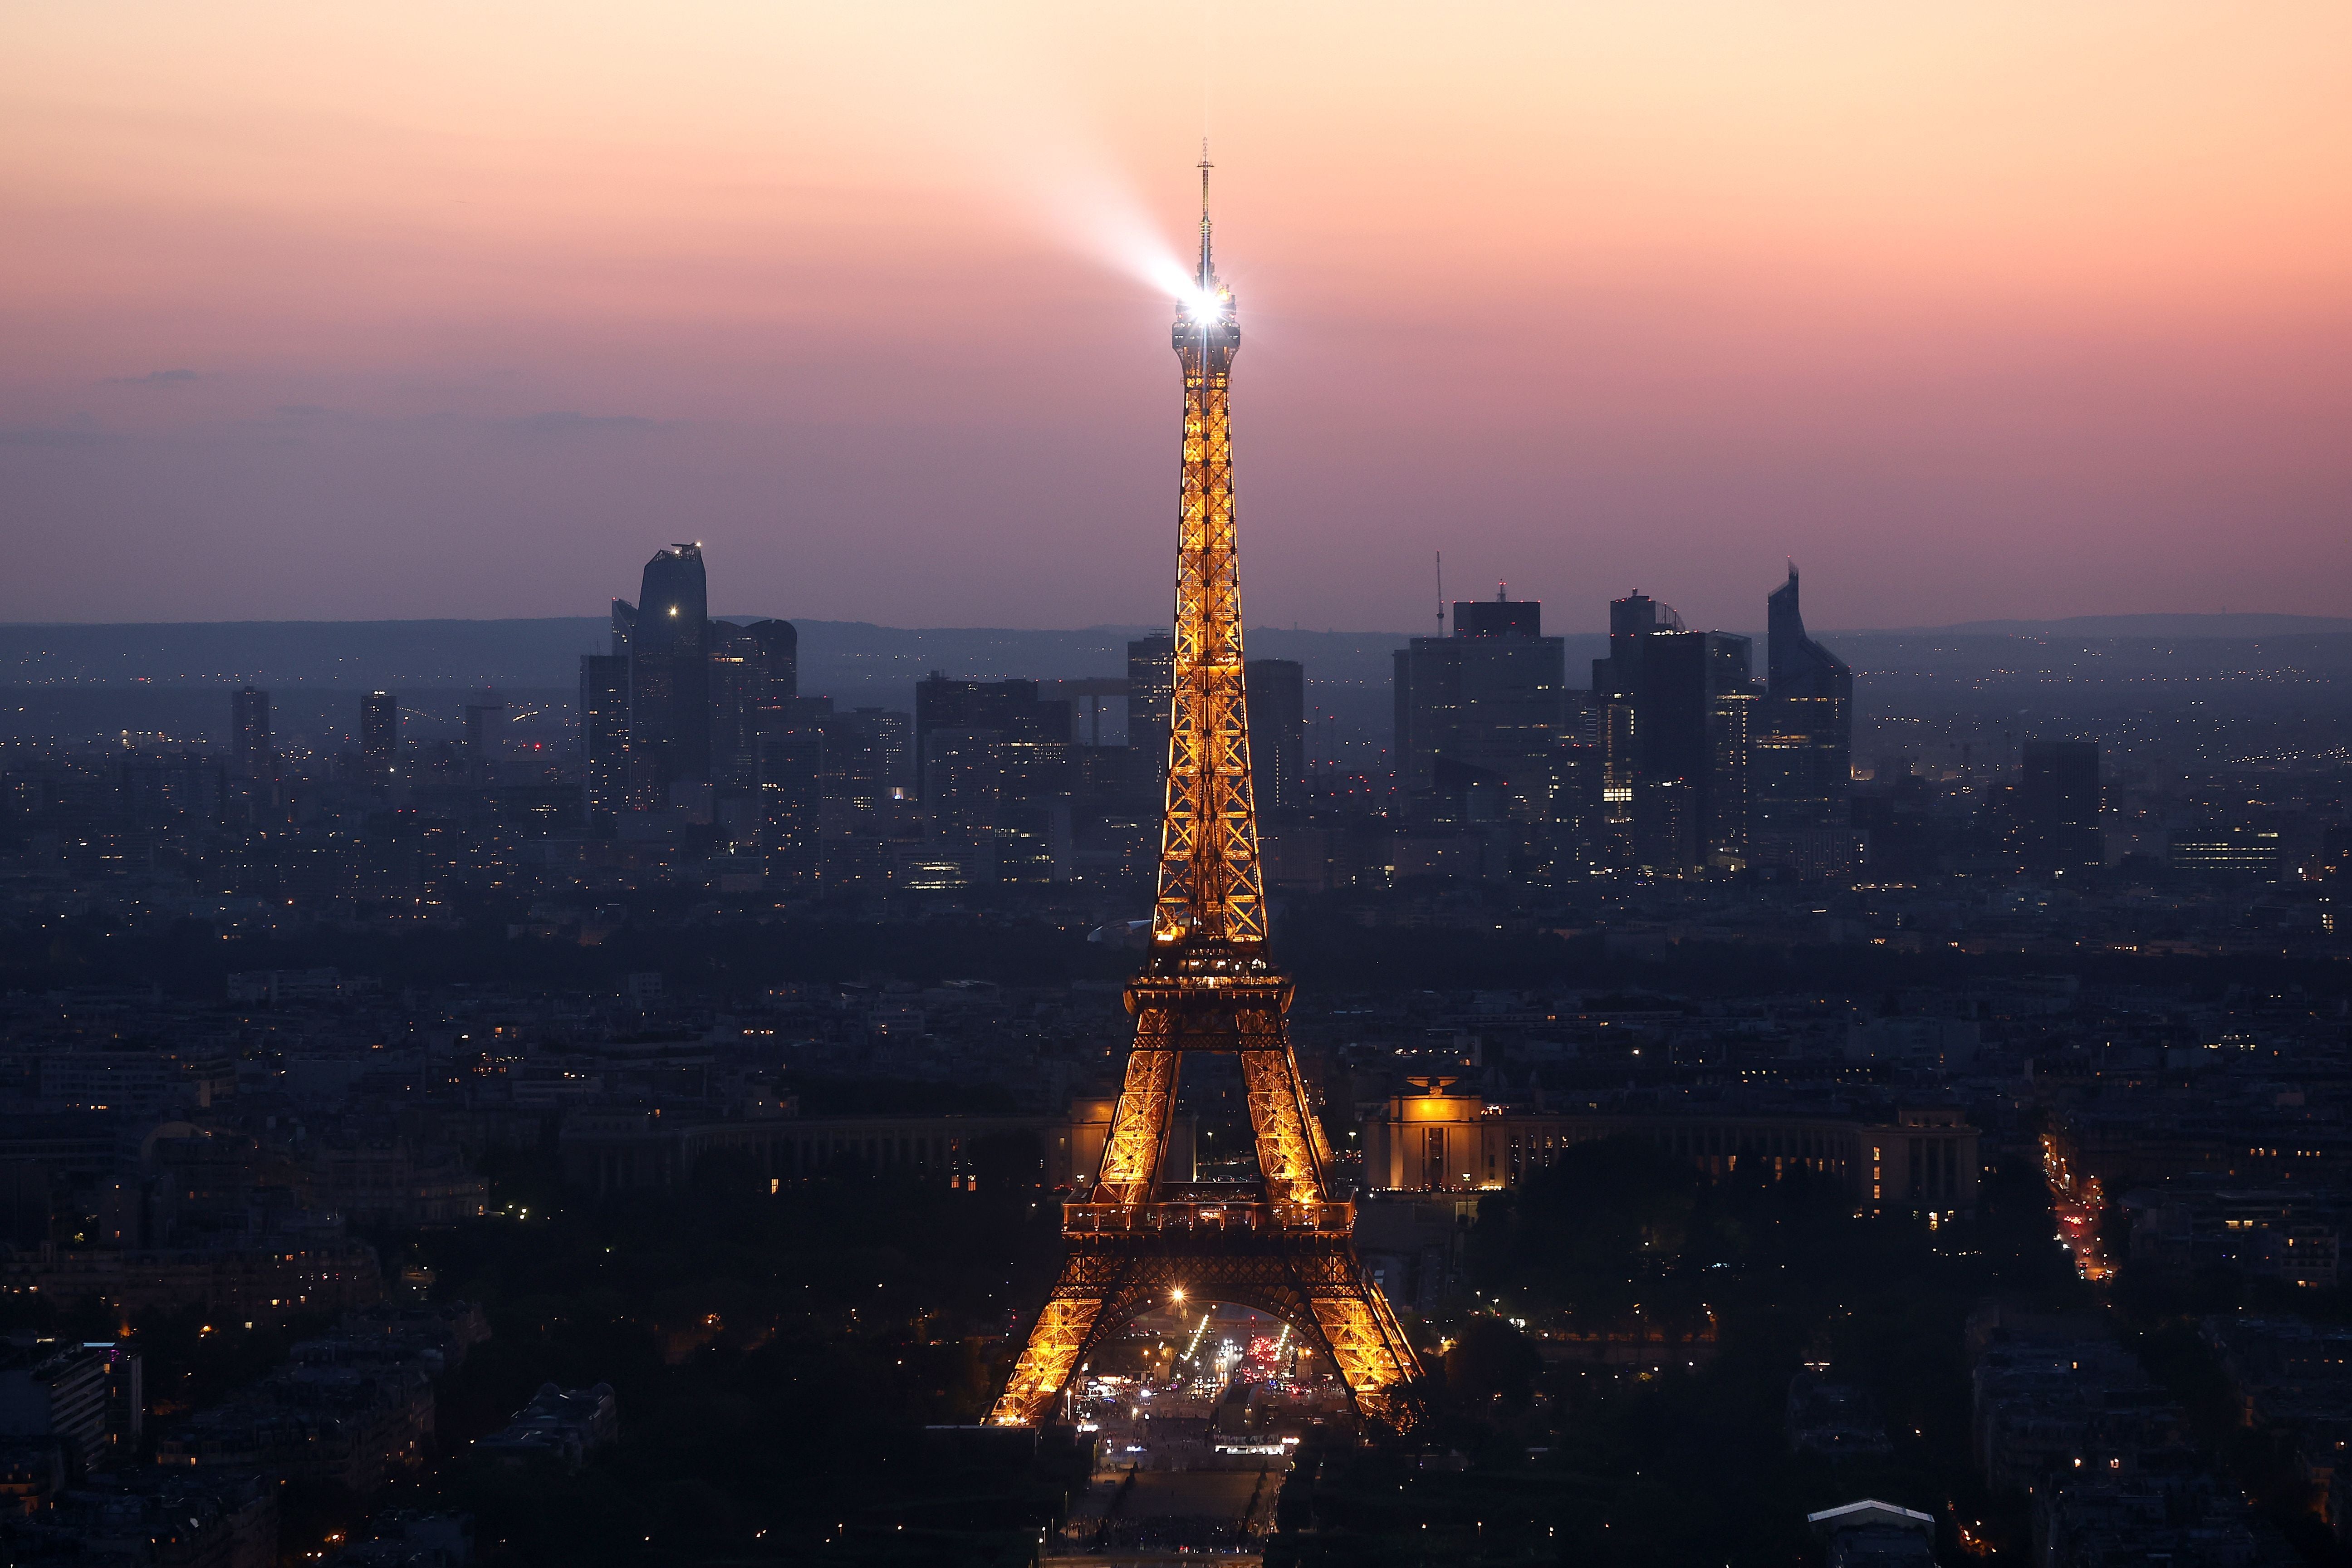 The Eiffel Tower stands illuminated after sunset in Paris